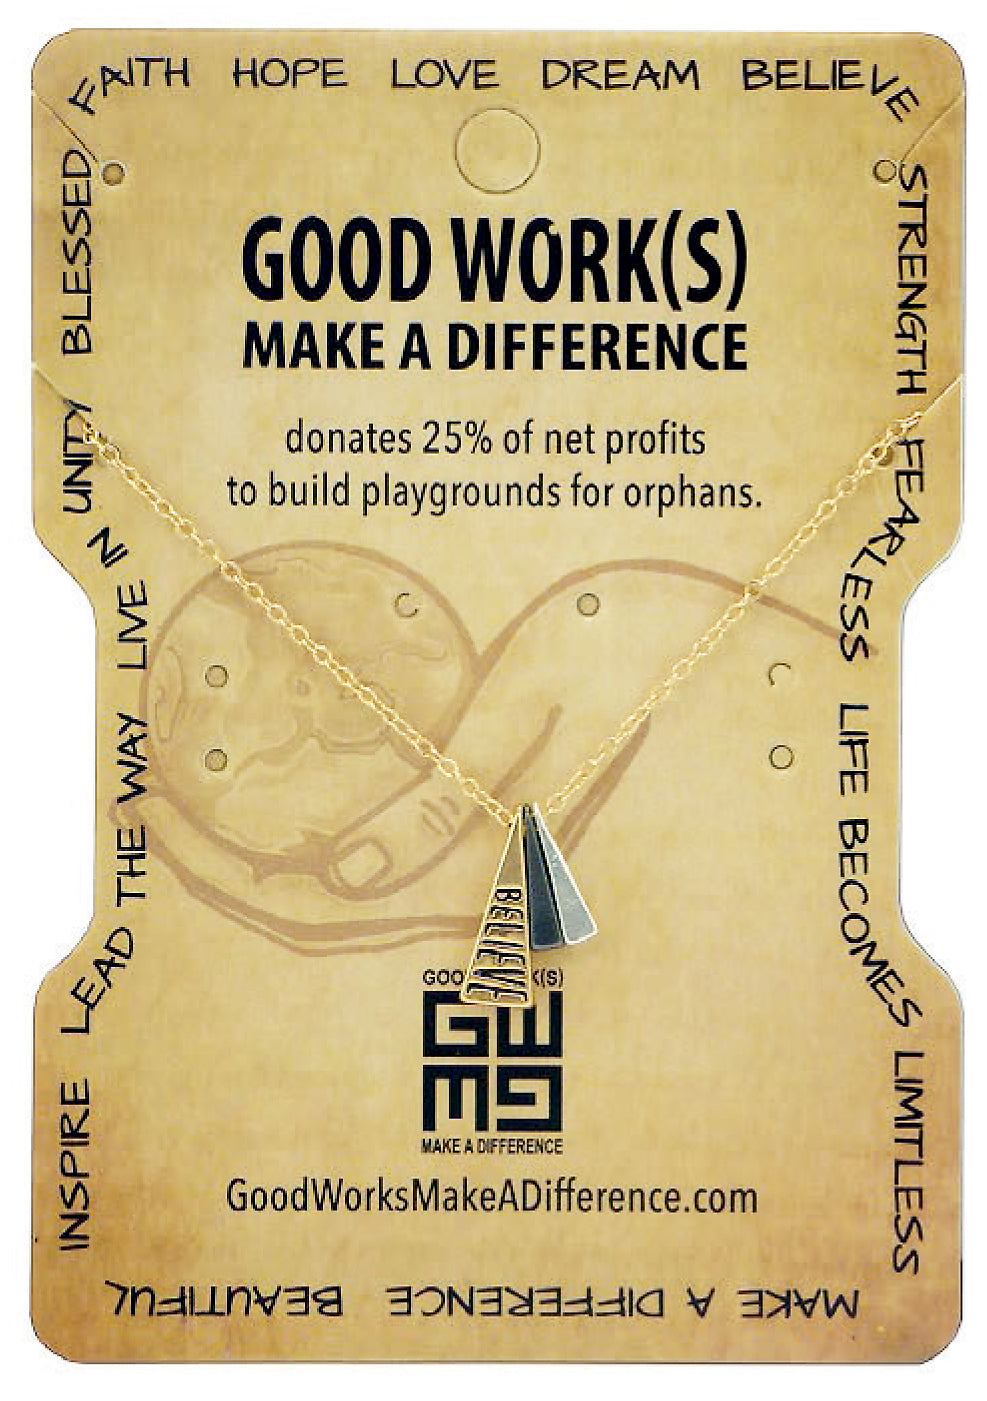 Bless Someone Necklace-Good Work(s) Make A Difference® | Christian and Inspirational Jewelry Company in Vernon, California